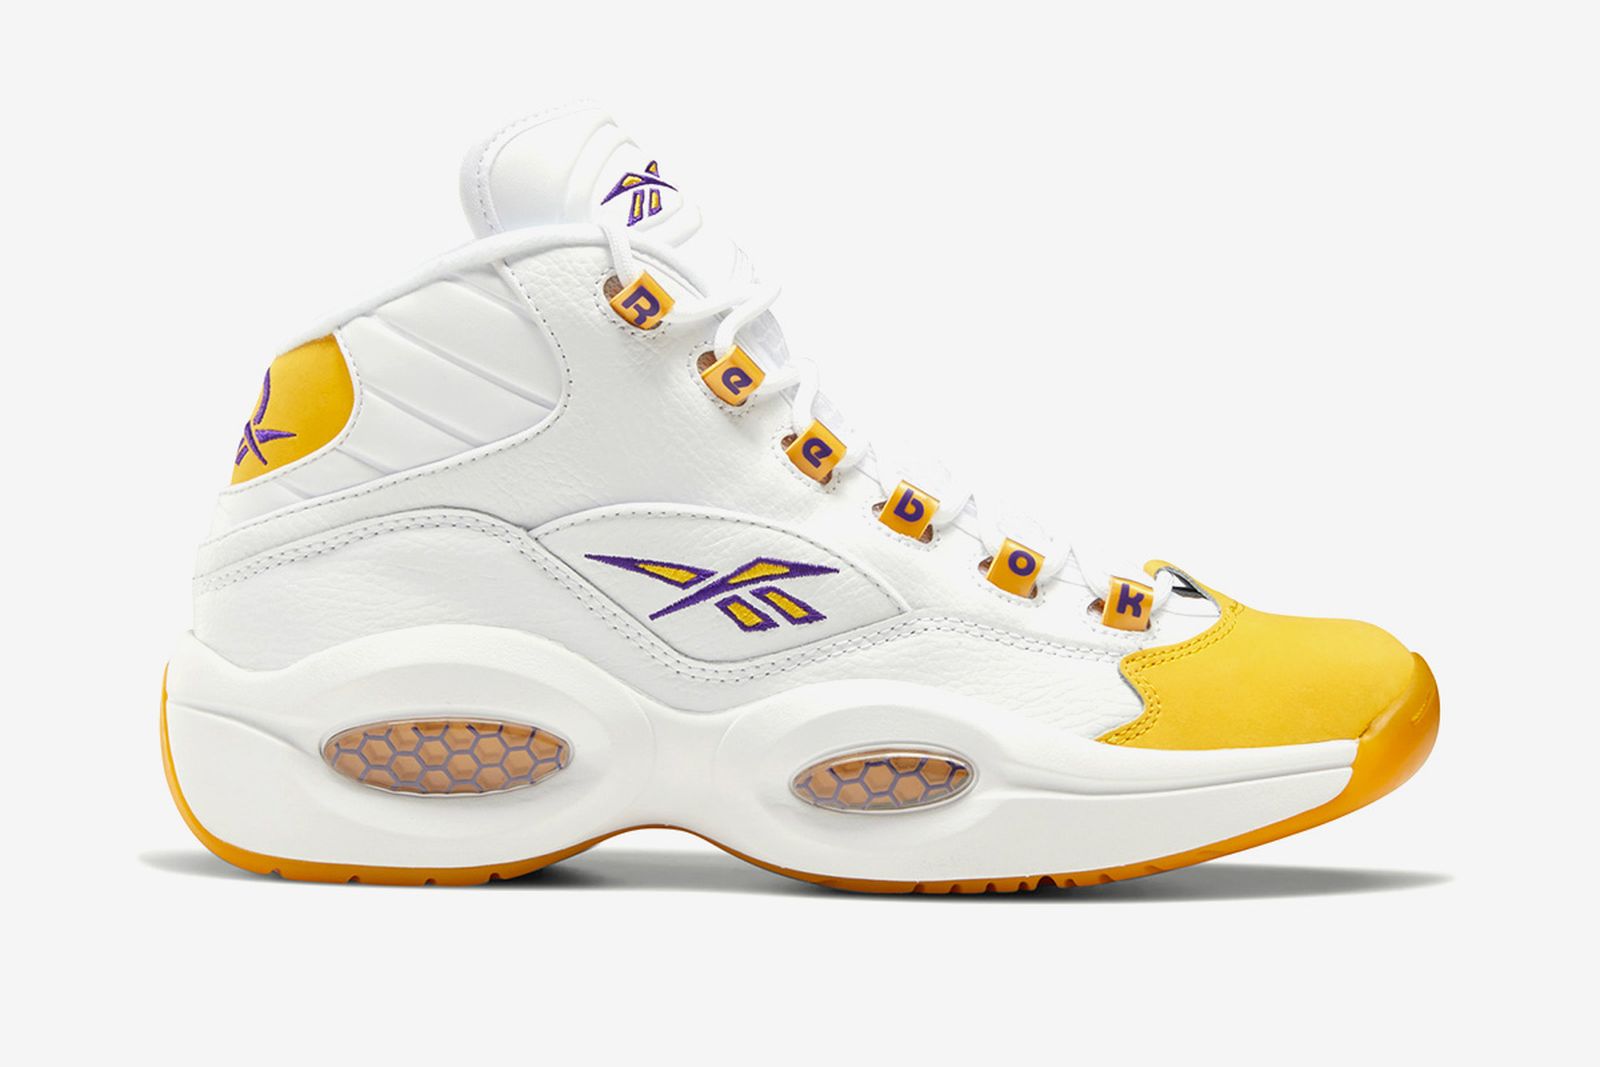 reebok-question-mid-yellow-toe-release-date-price-03